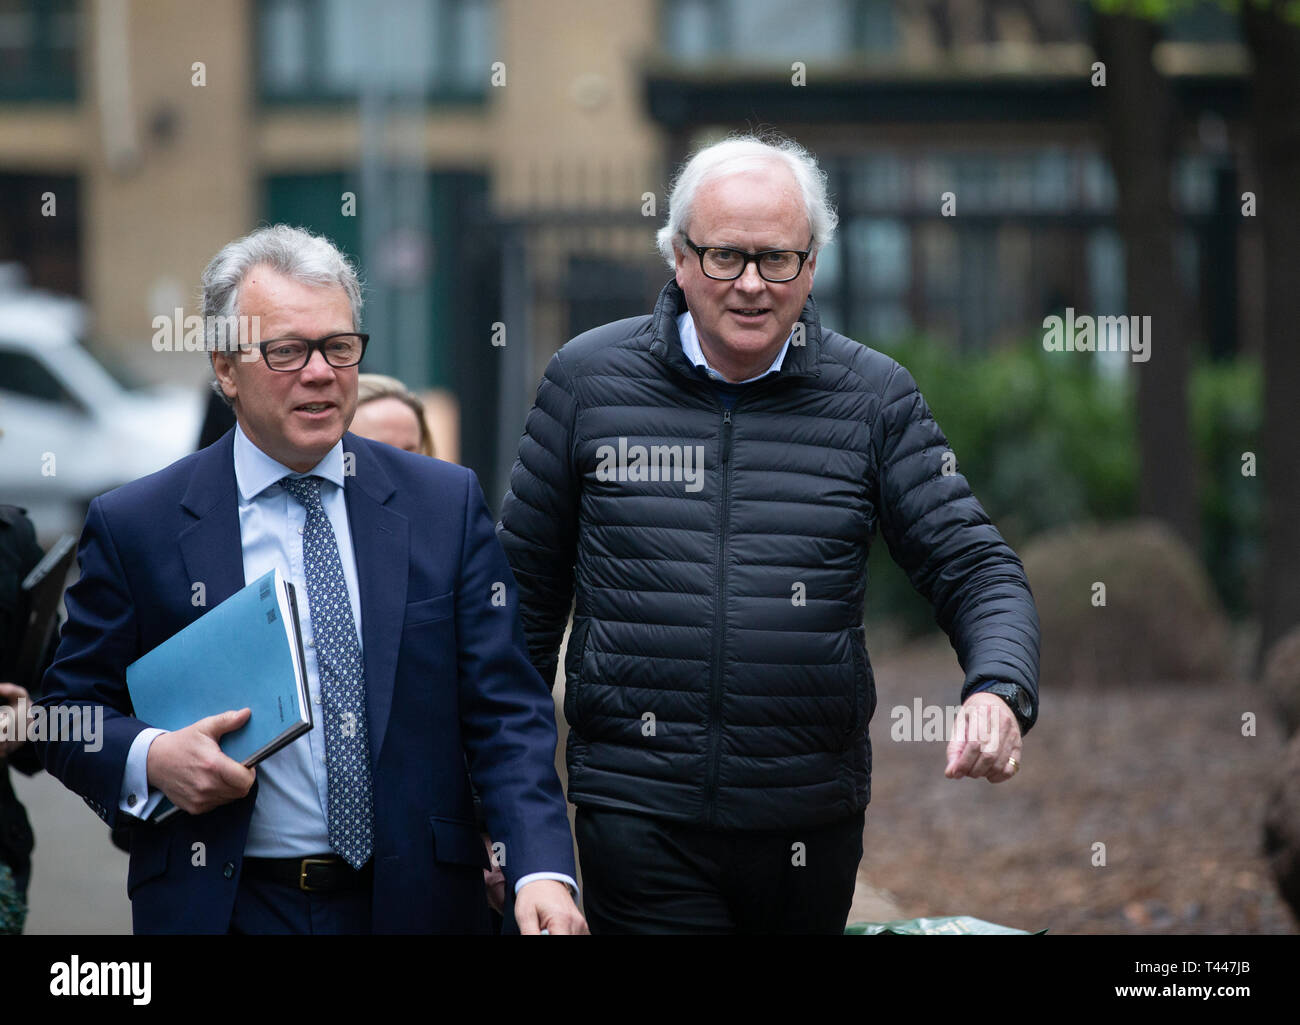 John Varley, Former Chief Executive of Barclays Bank, leaves Southwark Crown Court. The trial has been thrown out by the judge. The SFO may appeal. Stock Photo